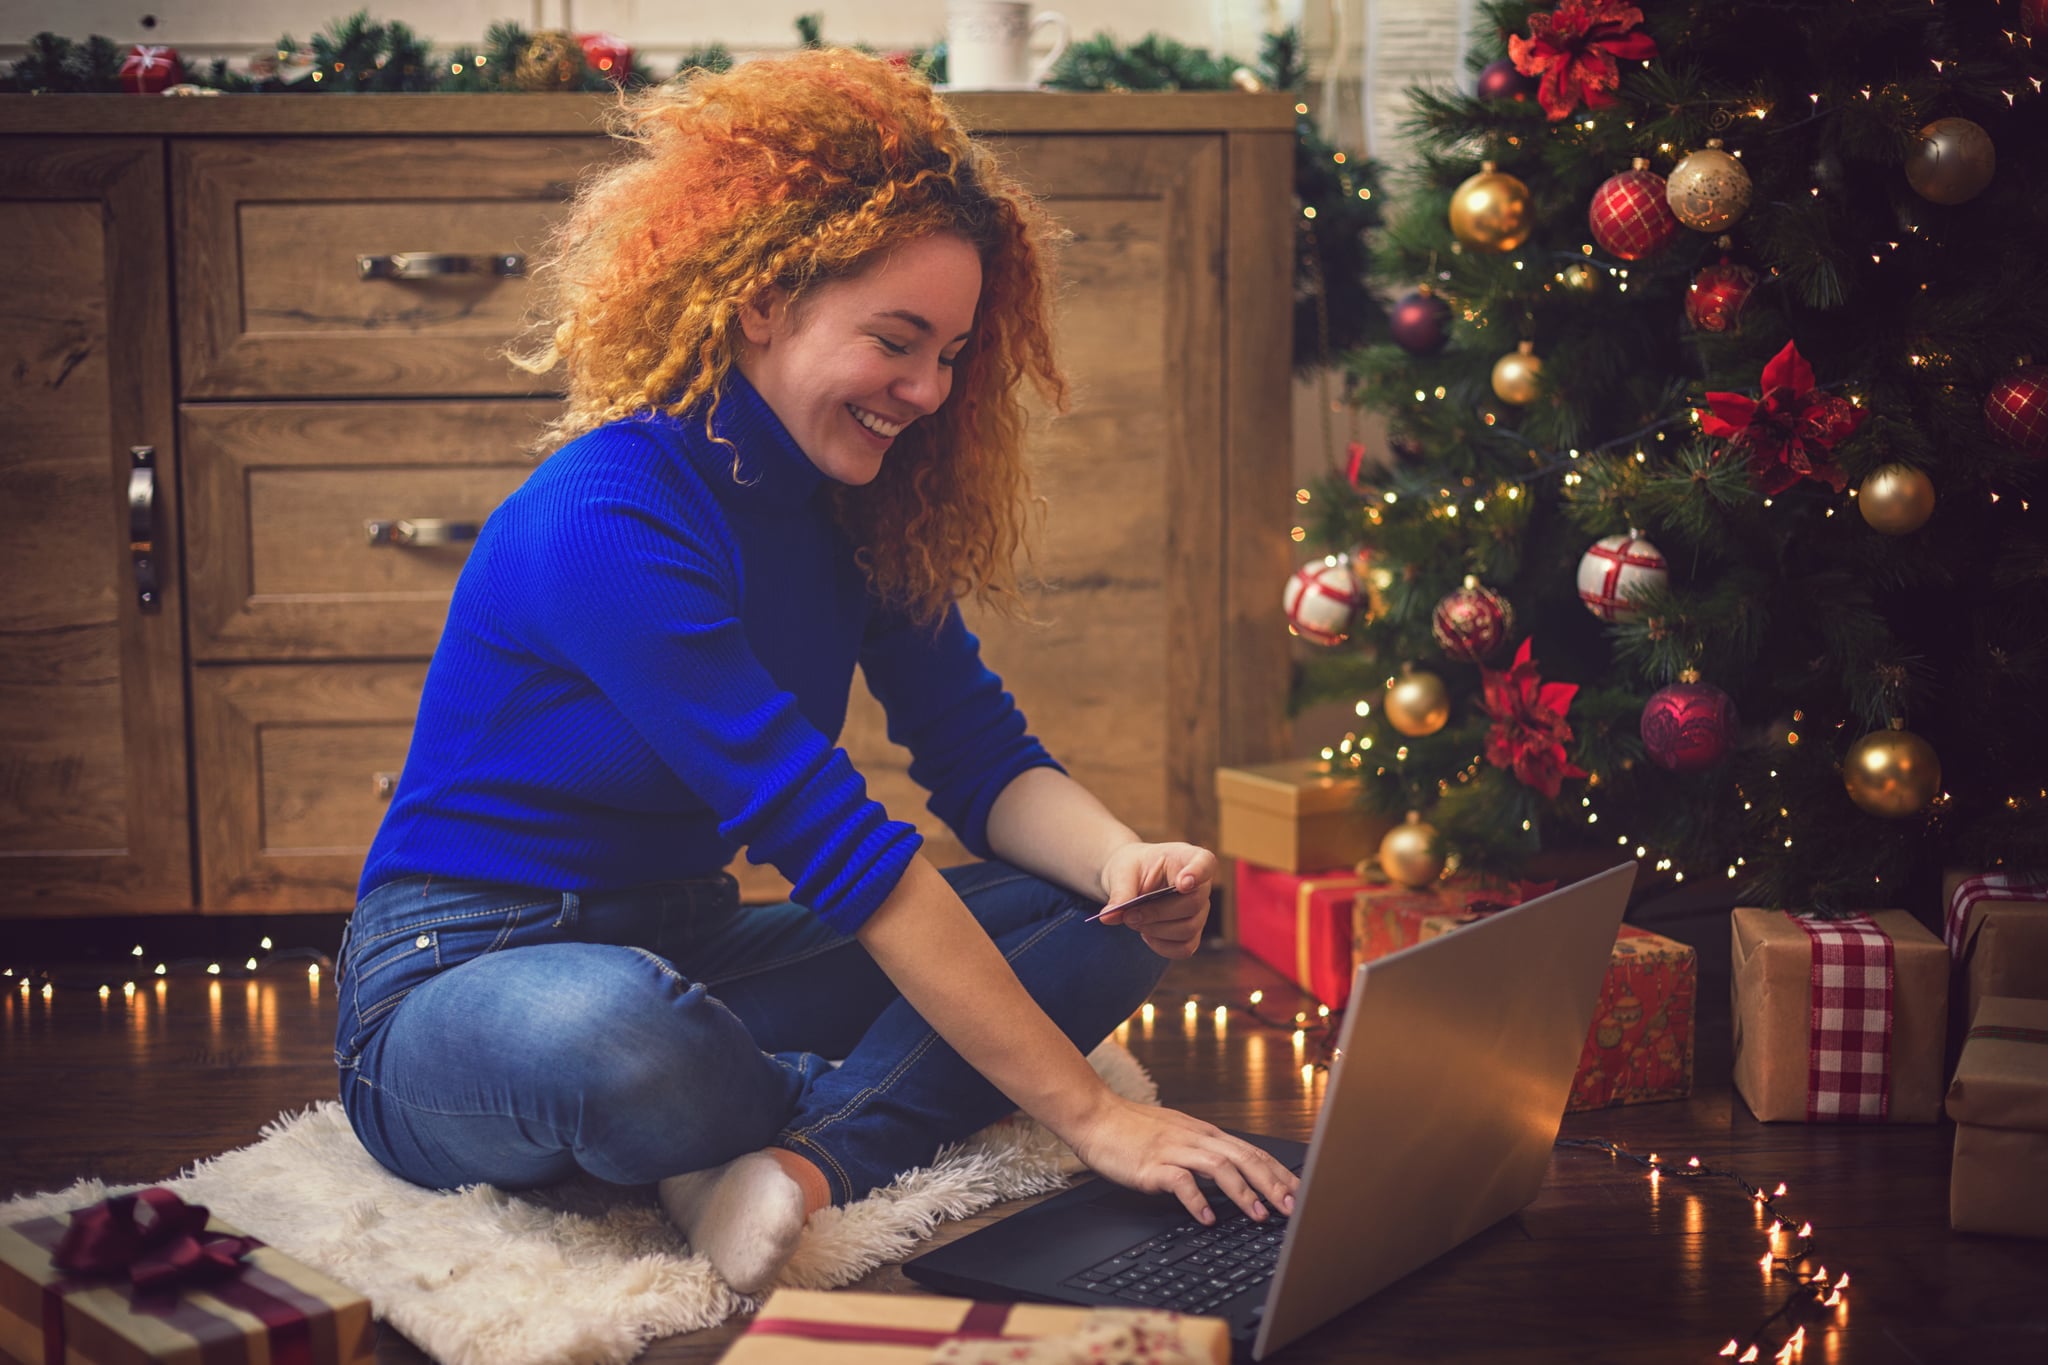 Young beautiful girl with red curly hair ,enjoying at home in a cozy Christmas atmosphere while using lap top for online shopping.